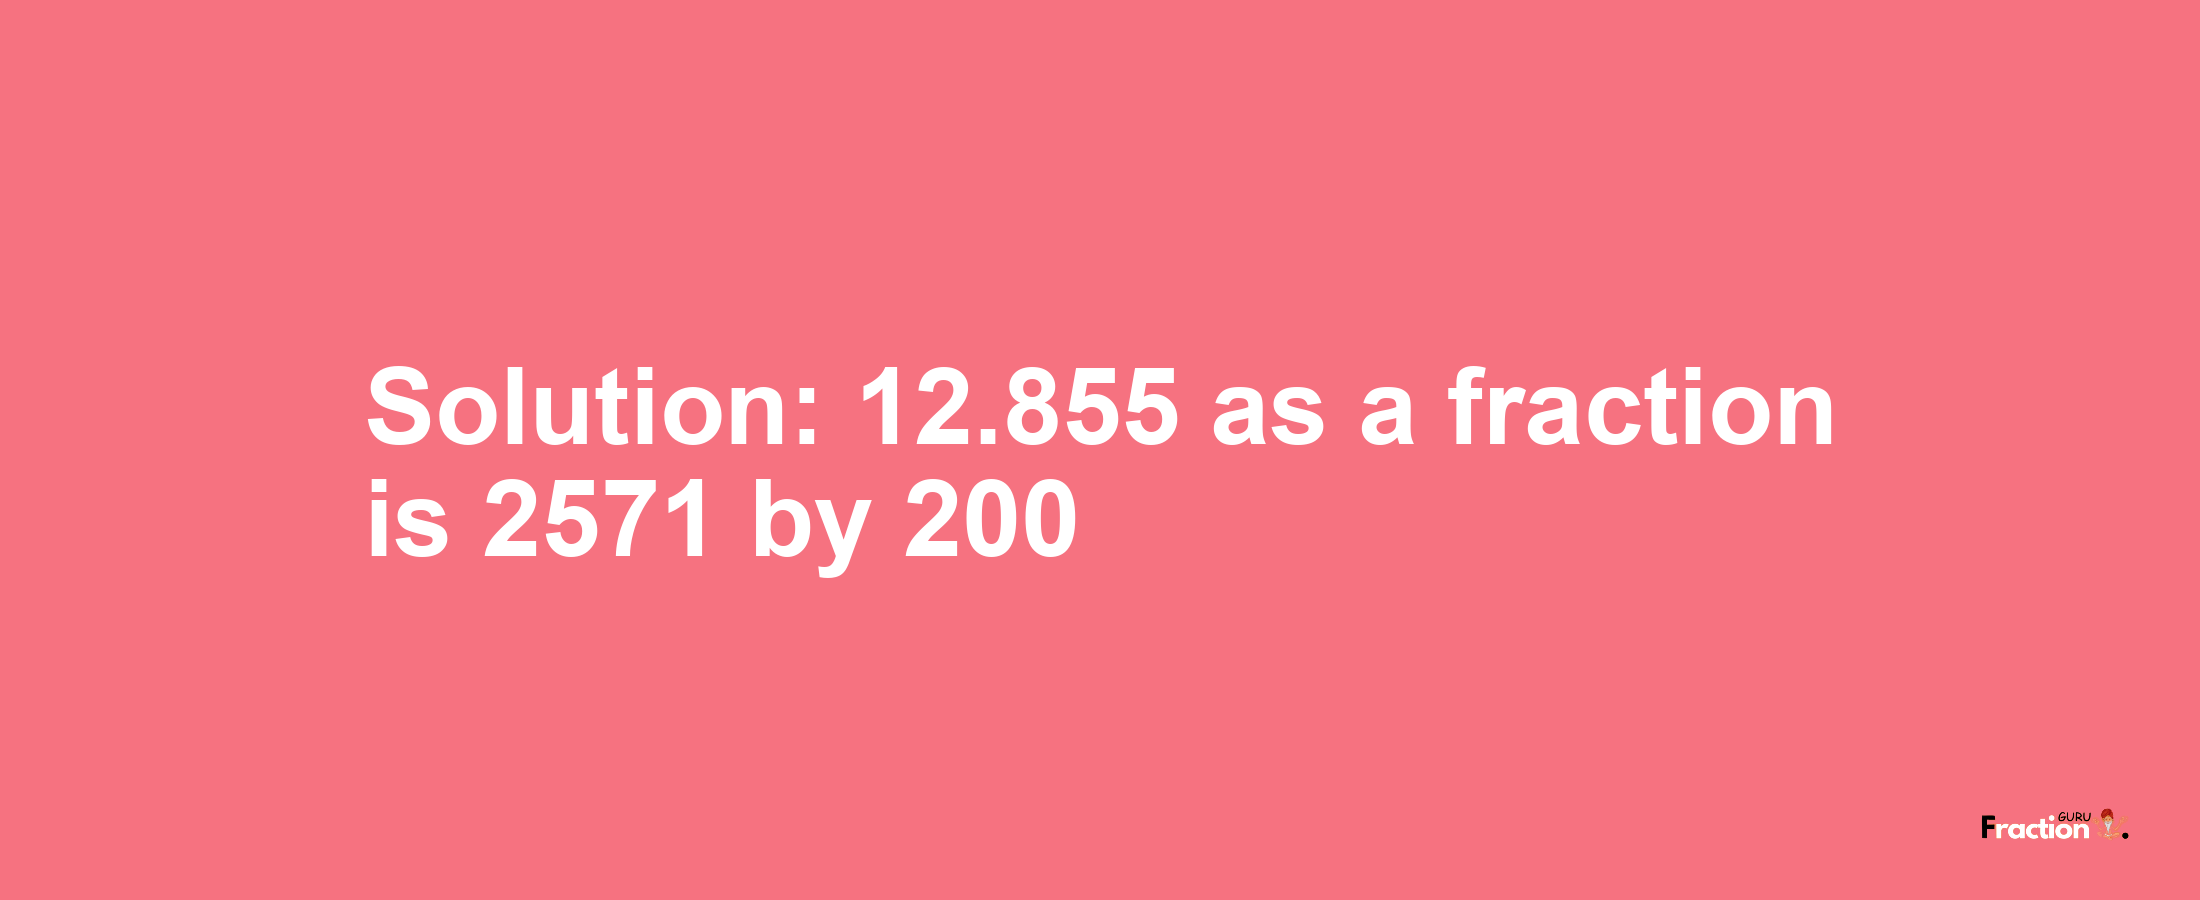 Solution:12.855 as a fraction is 2571/200